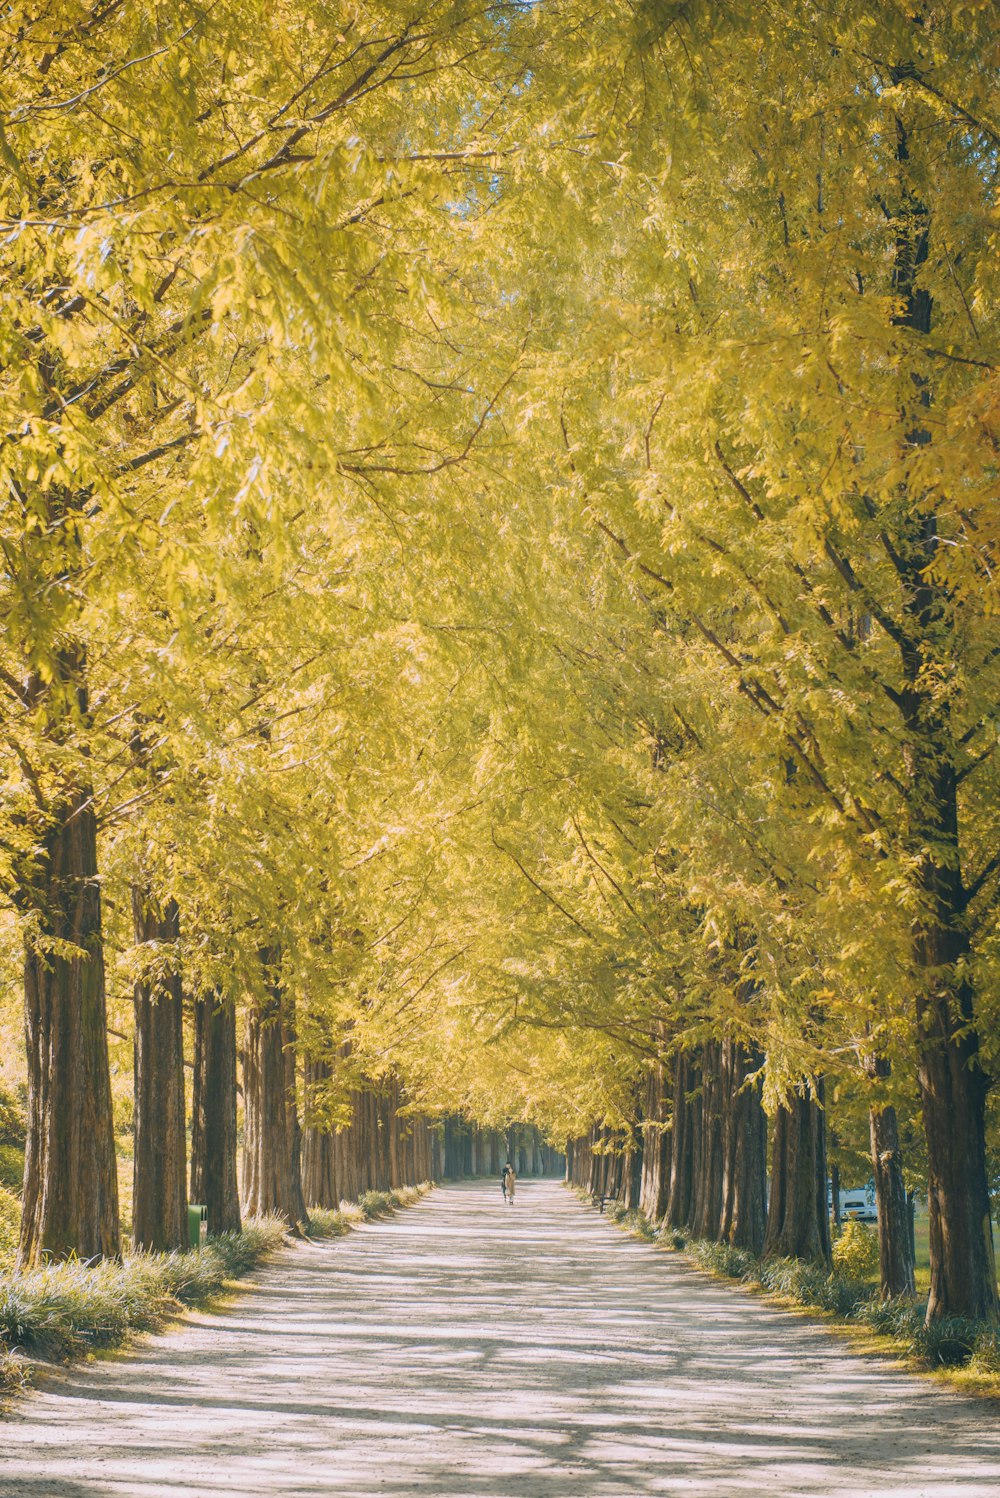 pathway in middle of yellow petaled trees